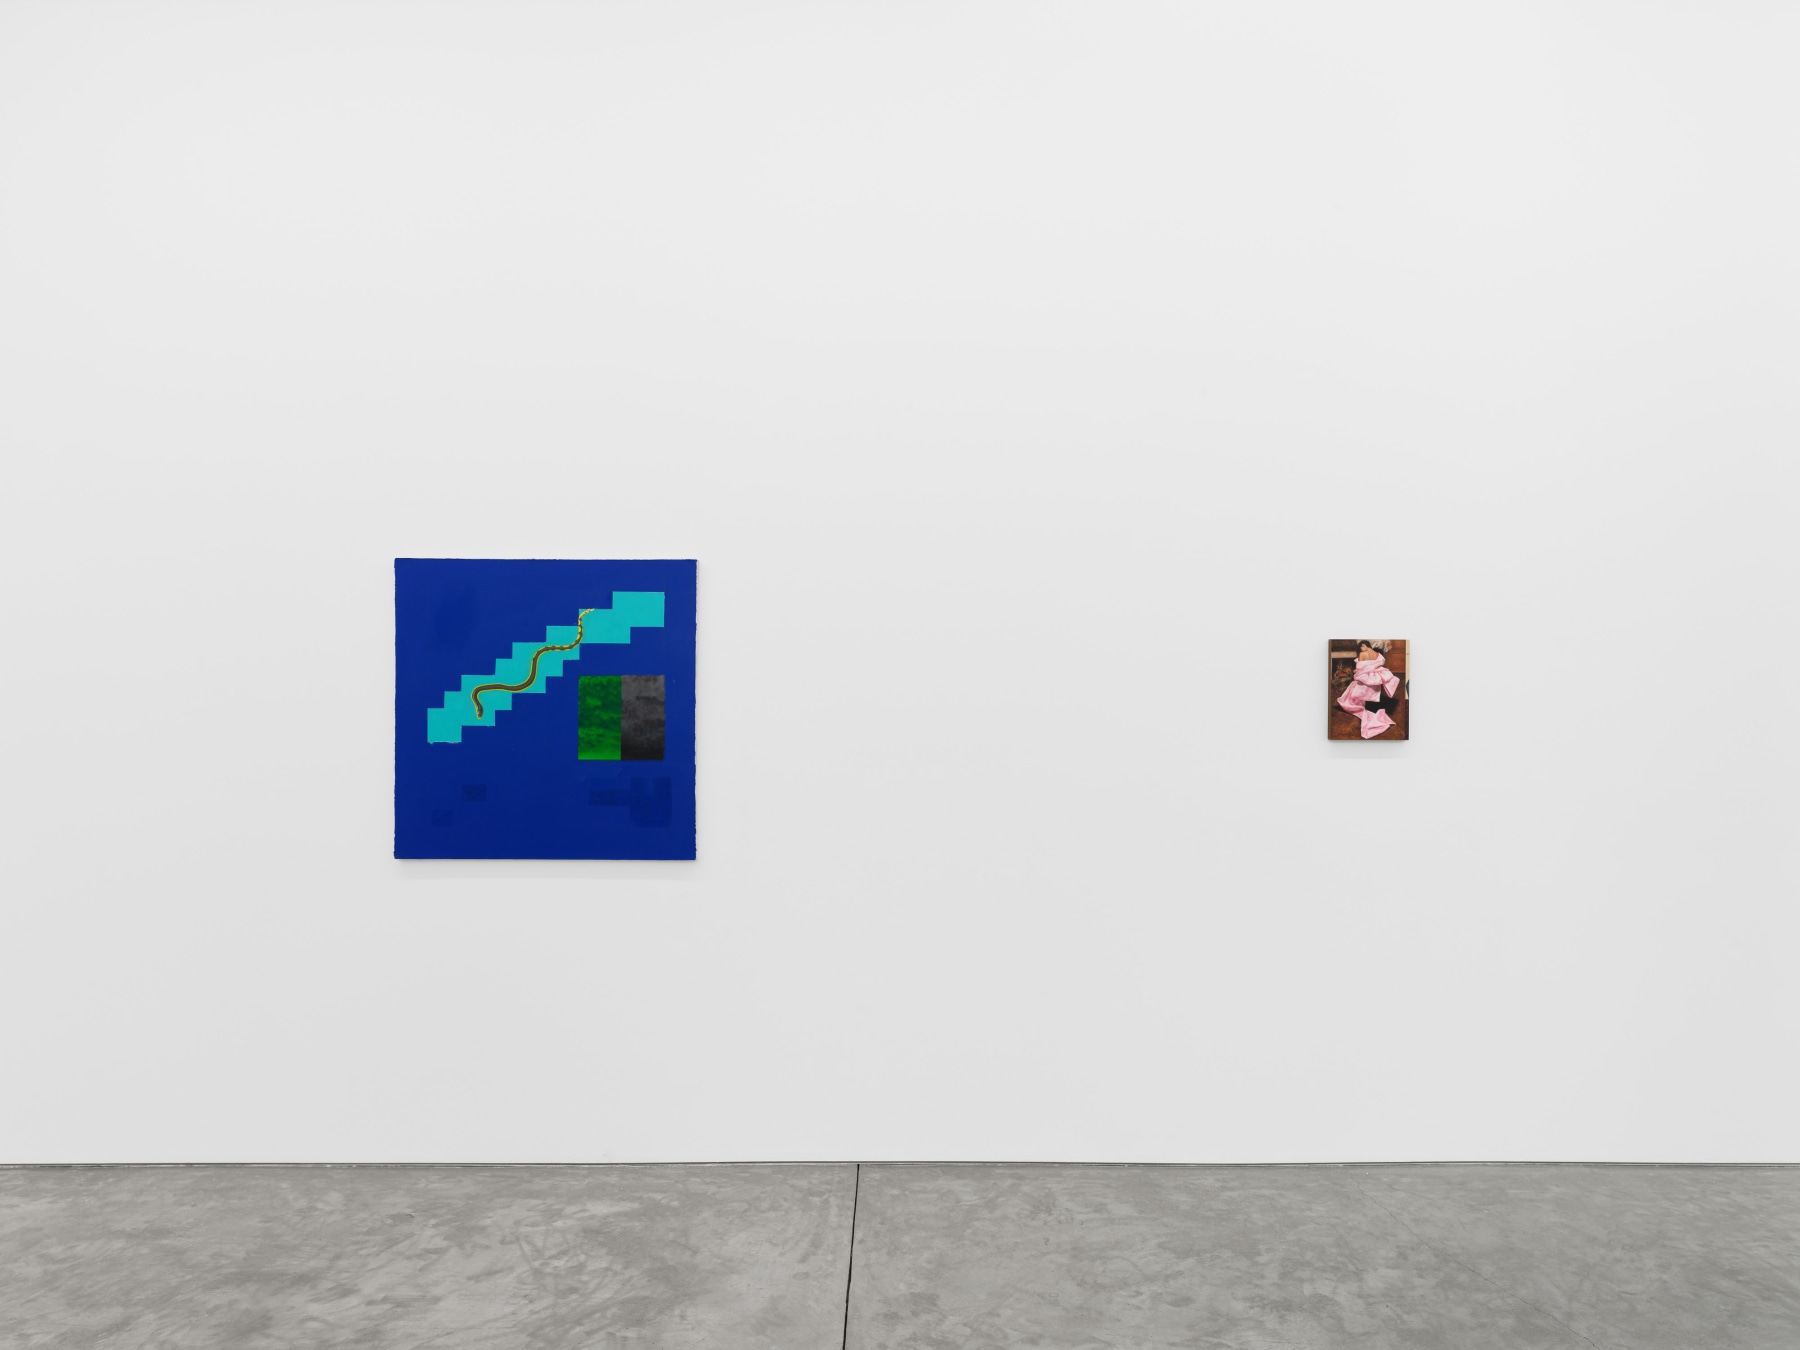 And Now at Night, installation view, 2022